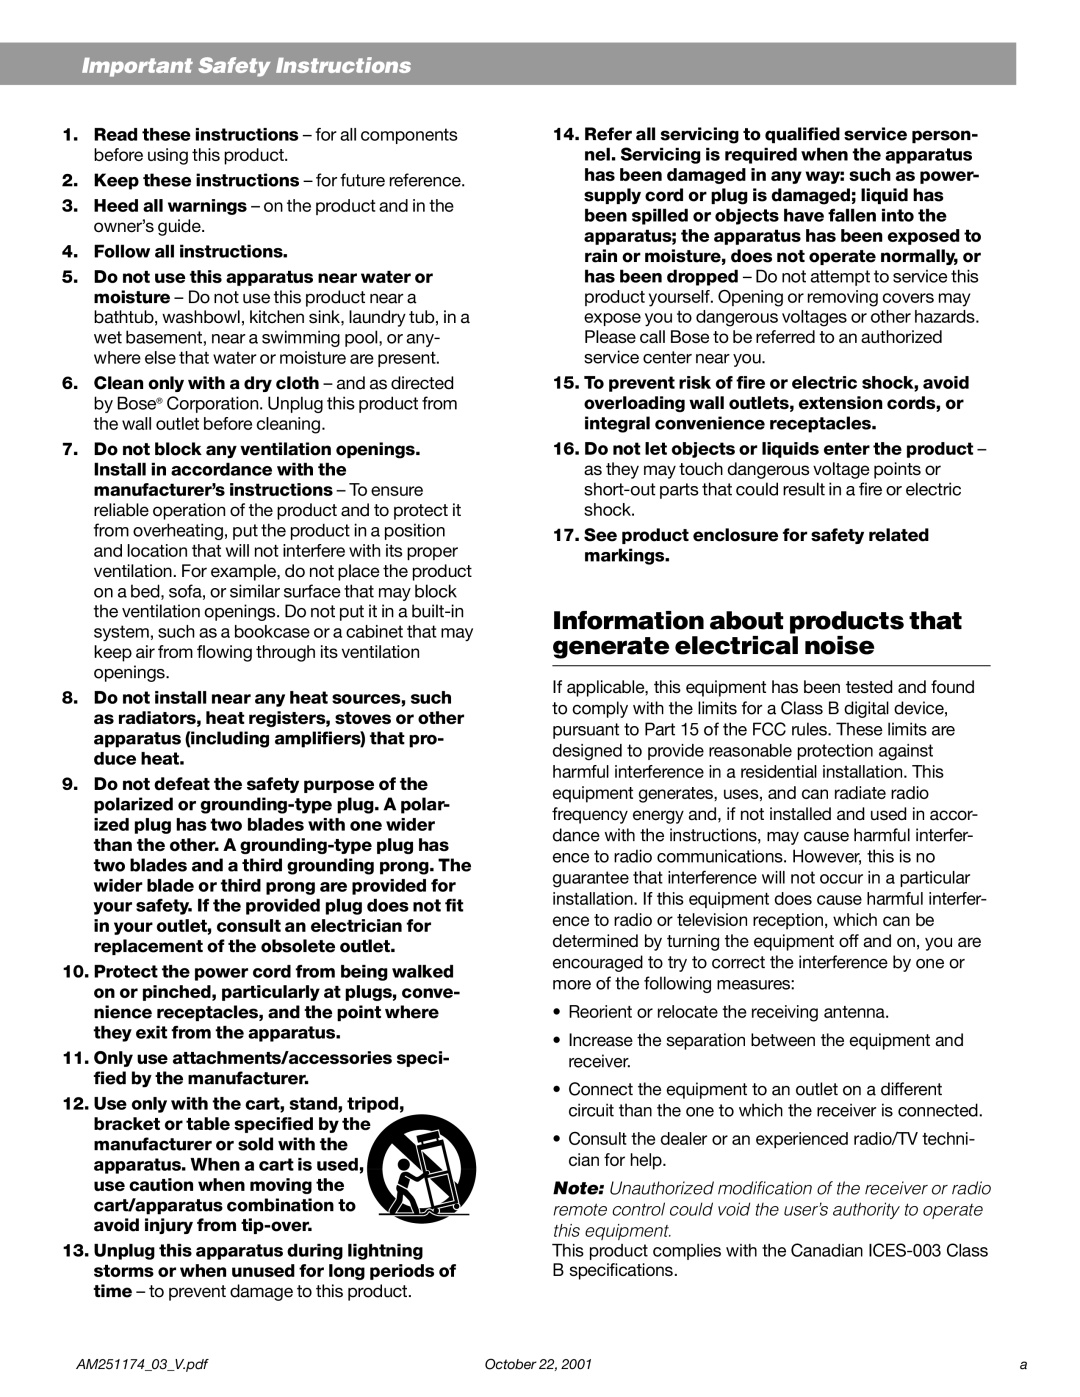 Bose Acoustimass manual Important Safety Instructions 